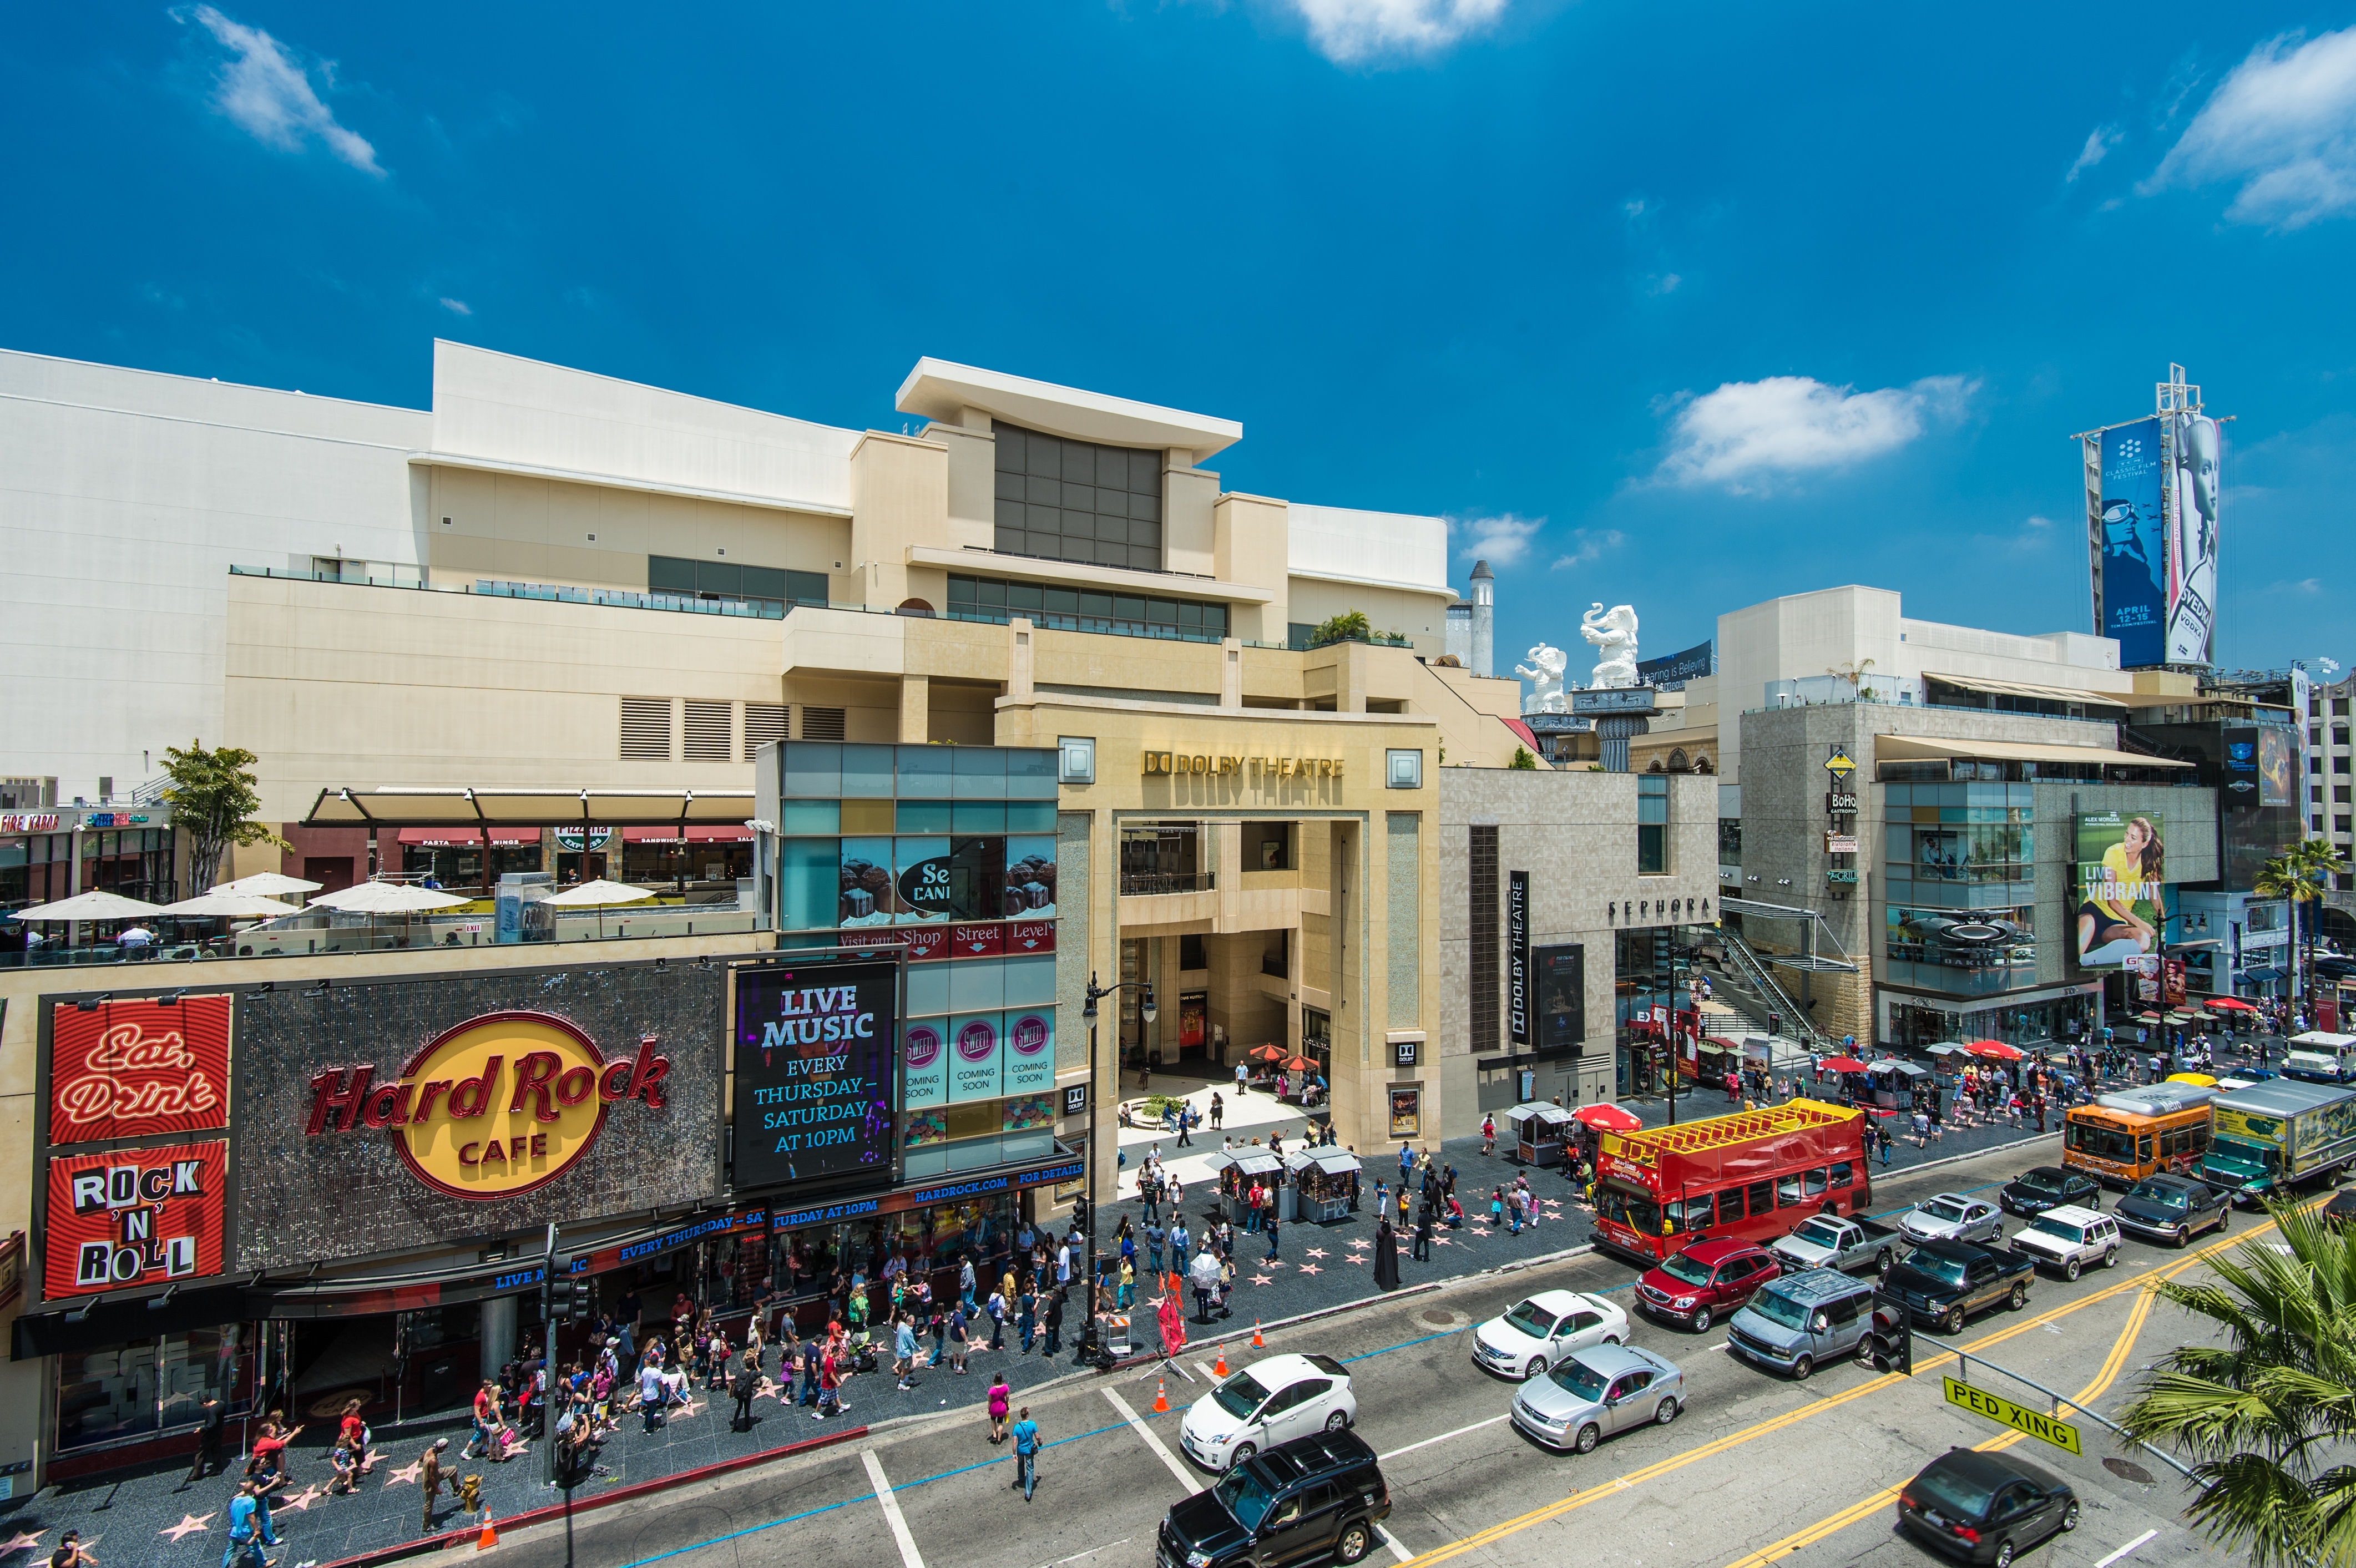 H&H Blvd. with Dolby Theatre arch